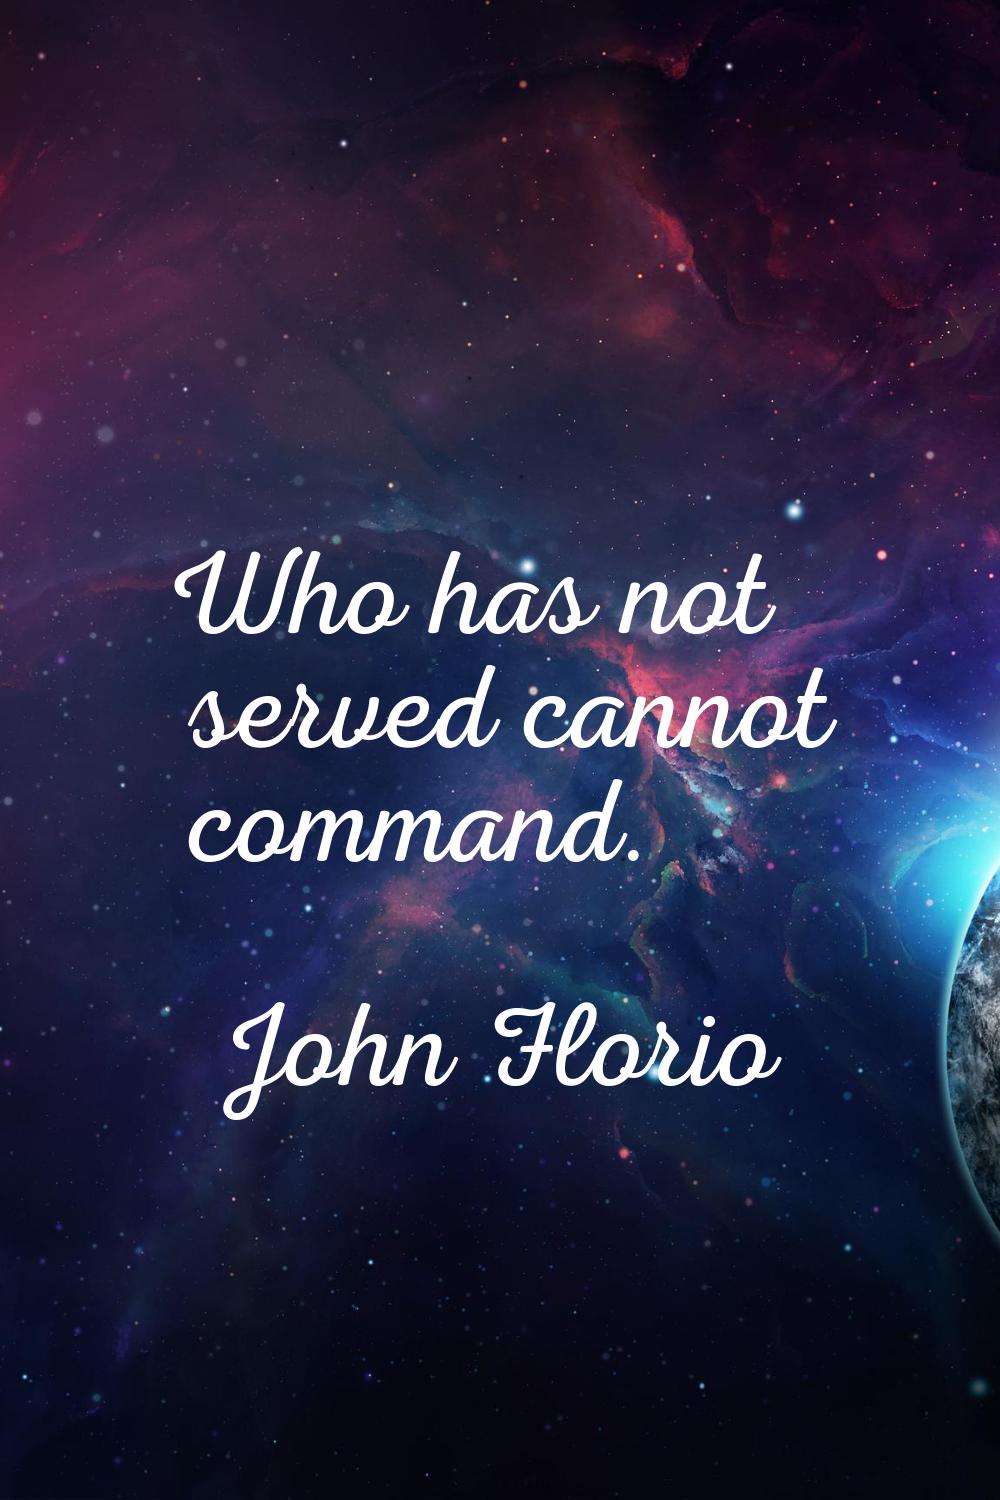 Who has not served cannot command.